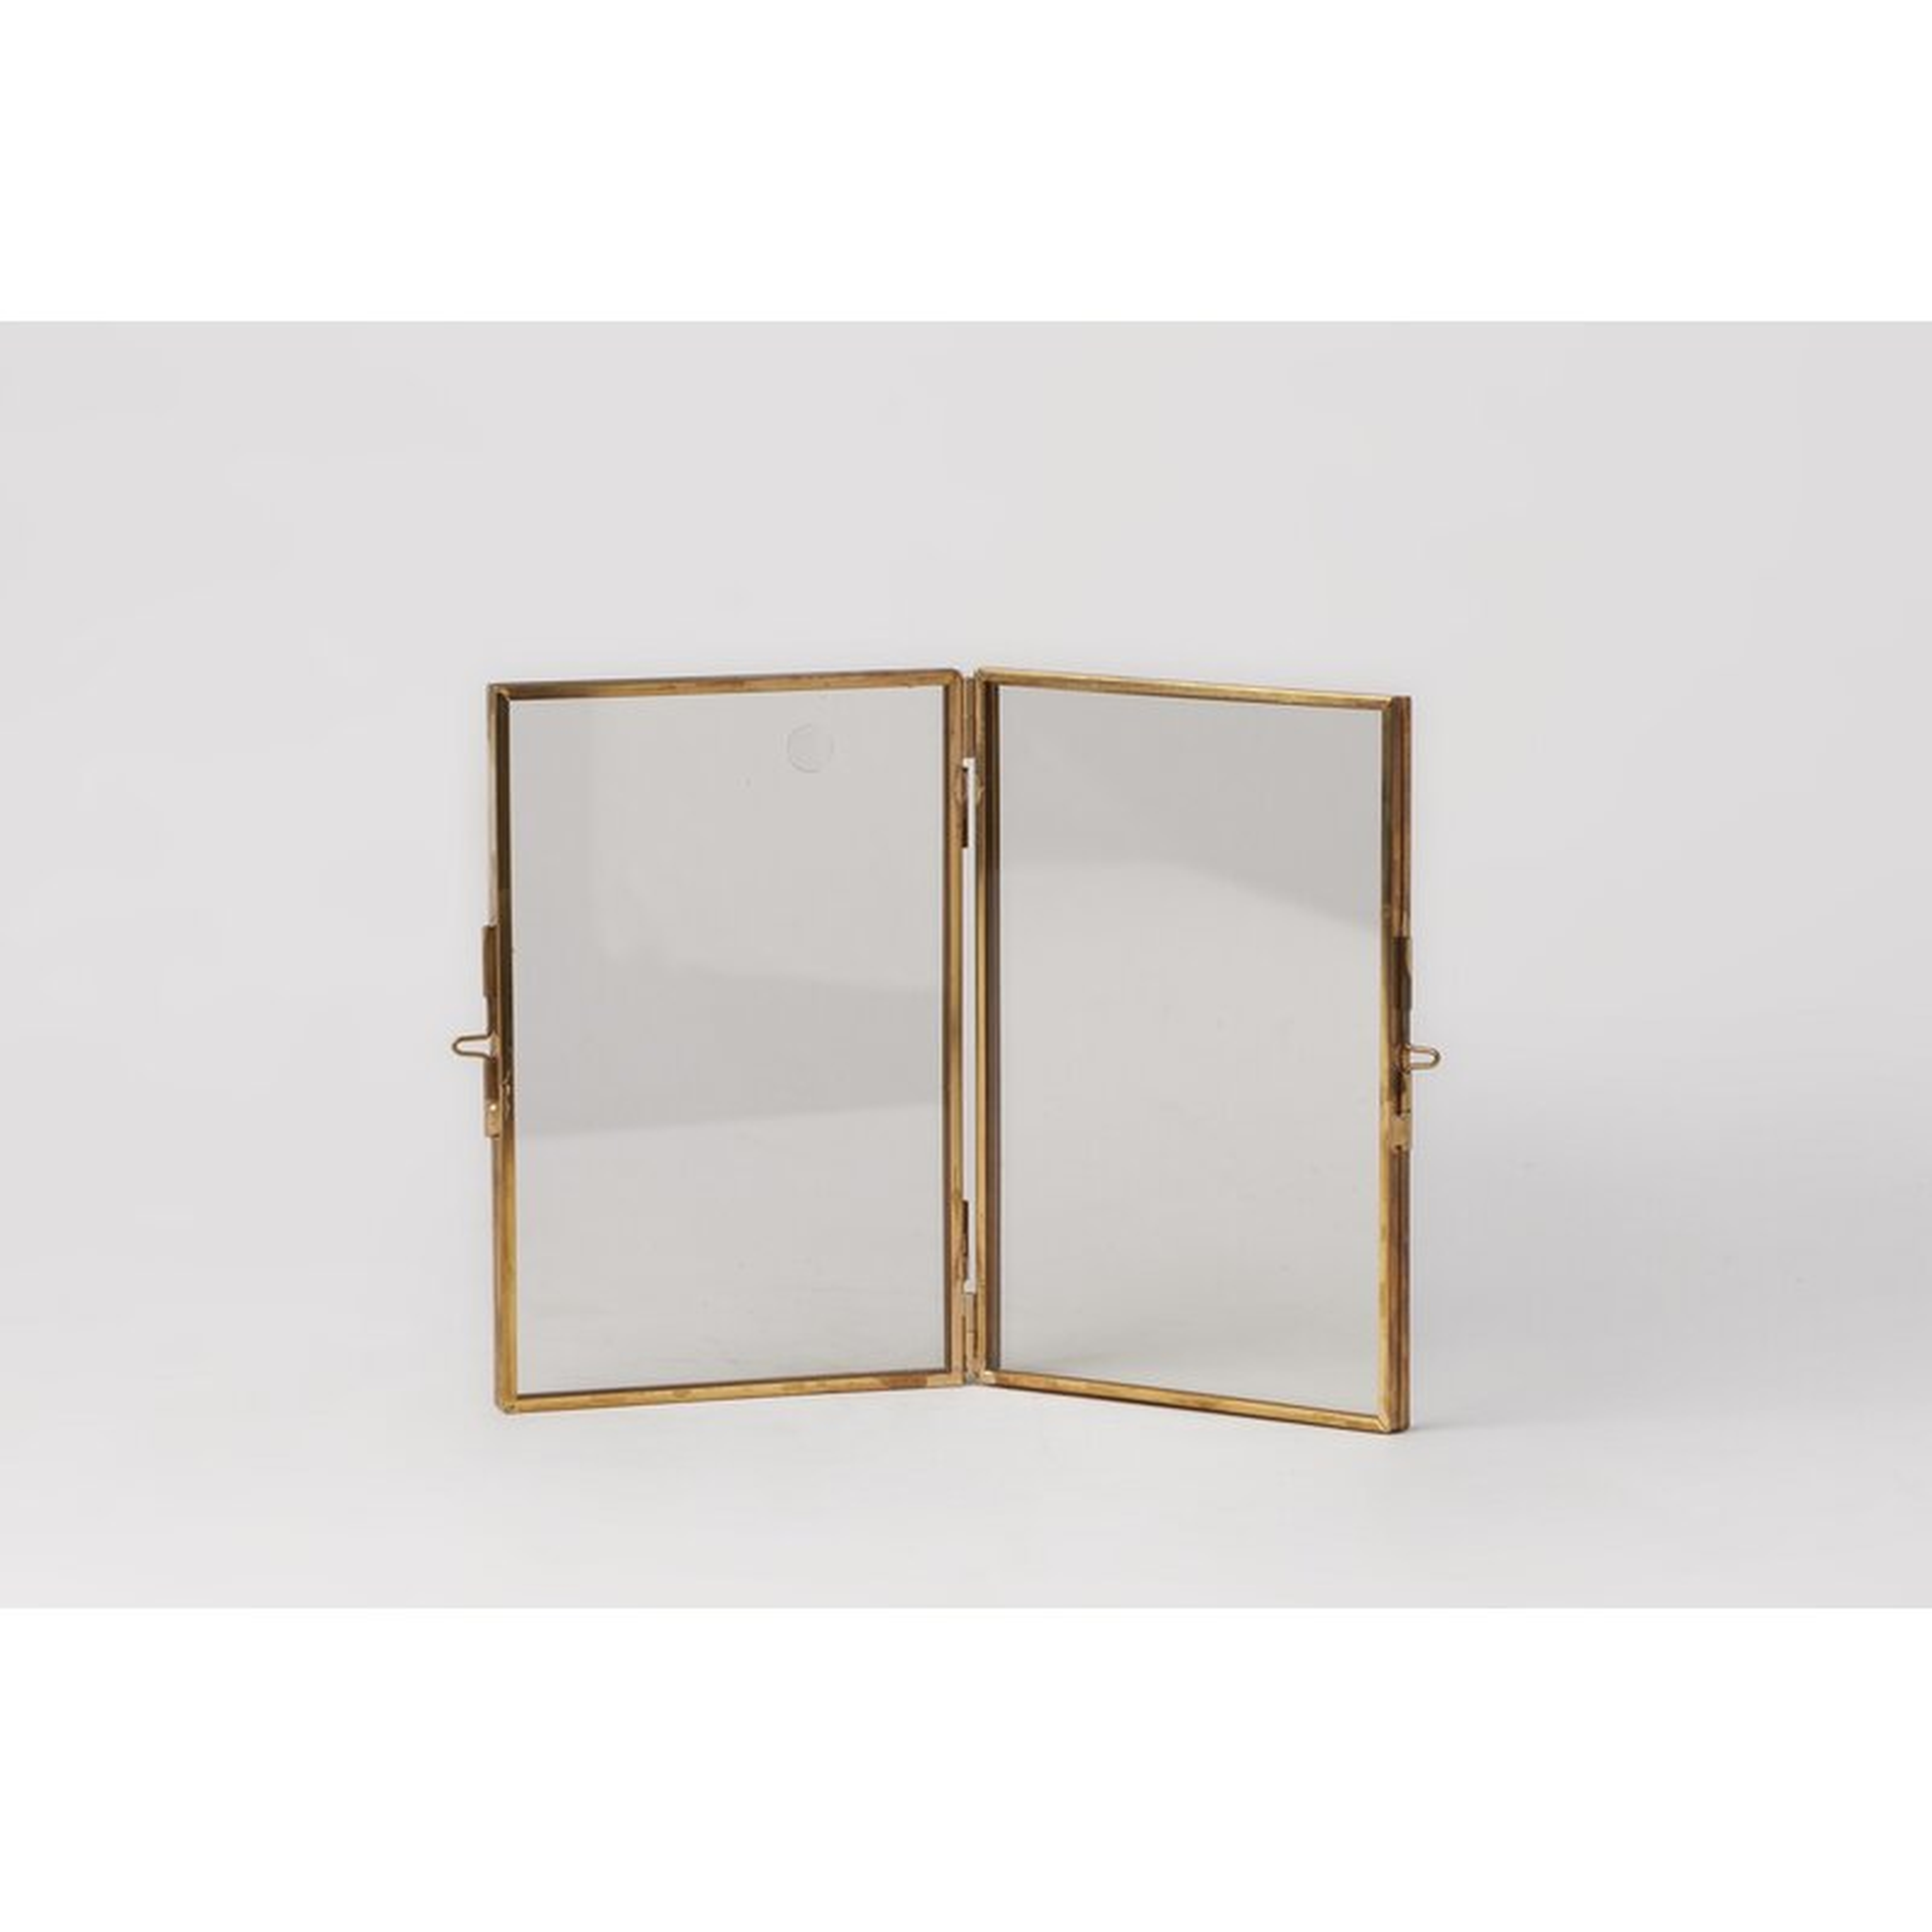 Fillion Copper Hinged Picture Frame - 4x6 - Wayfair